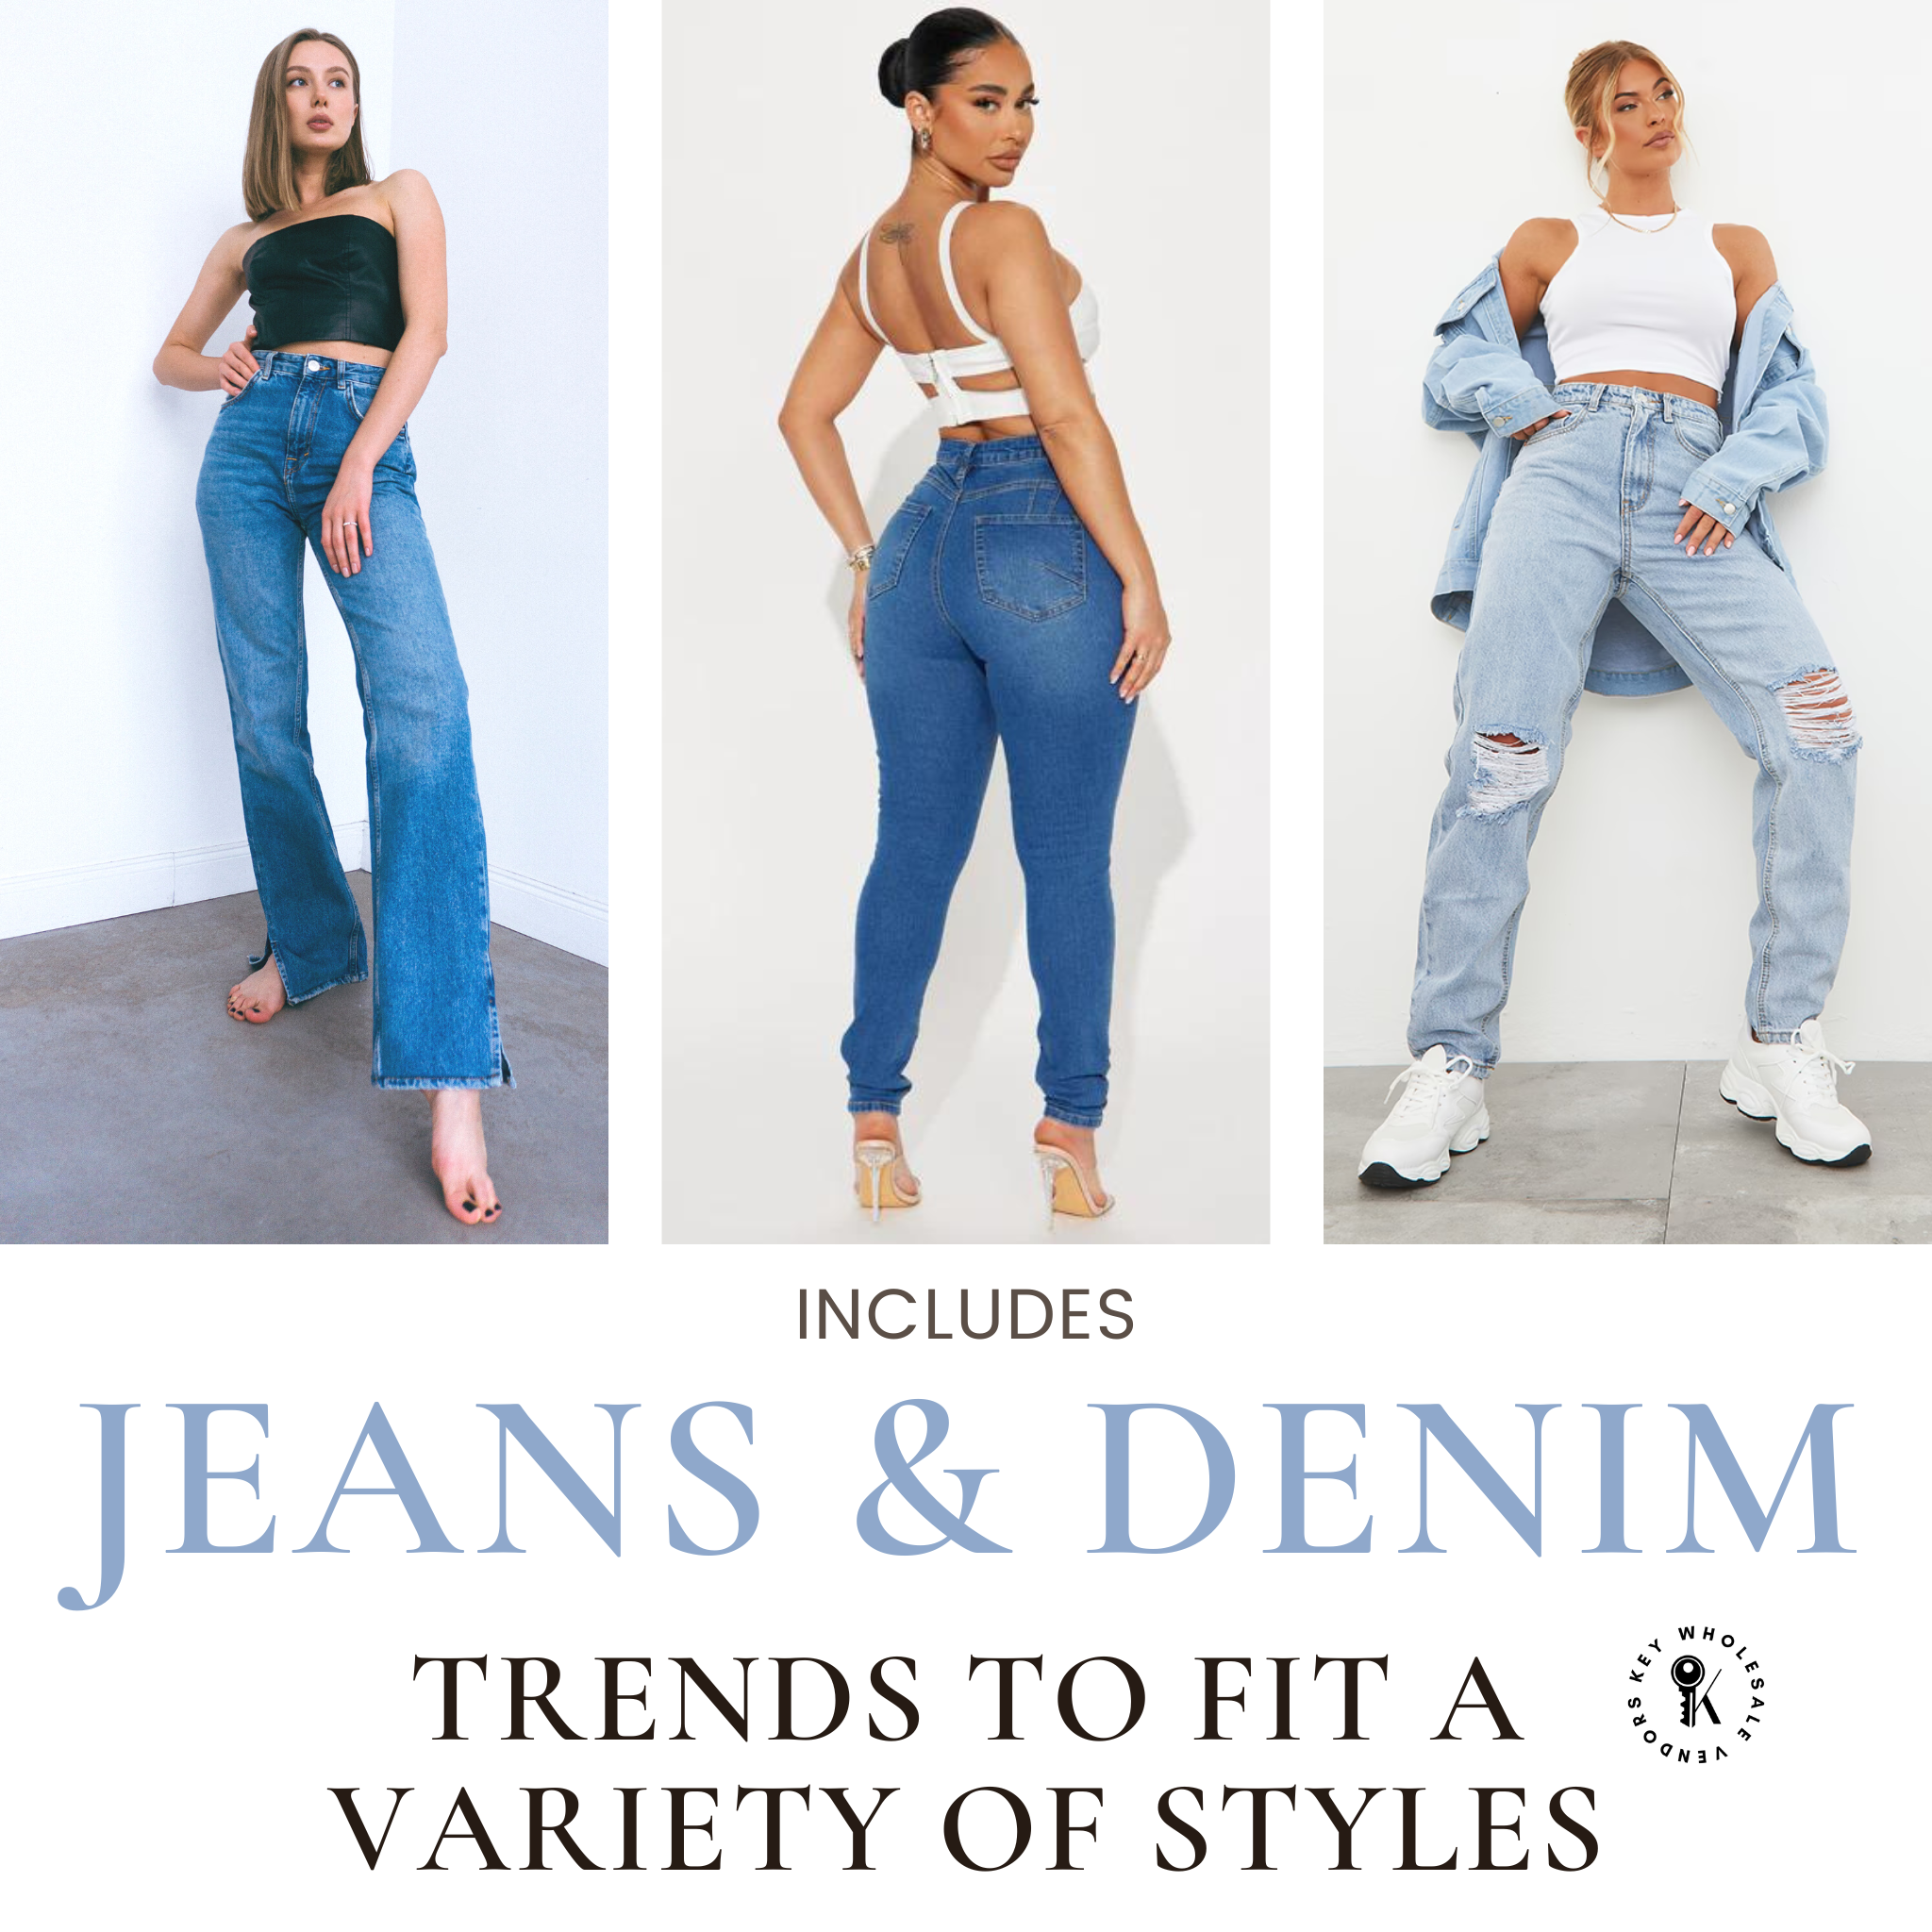 Because Magazine - Can Denim Be Sustainable?